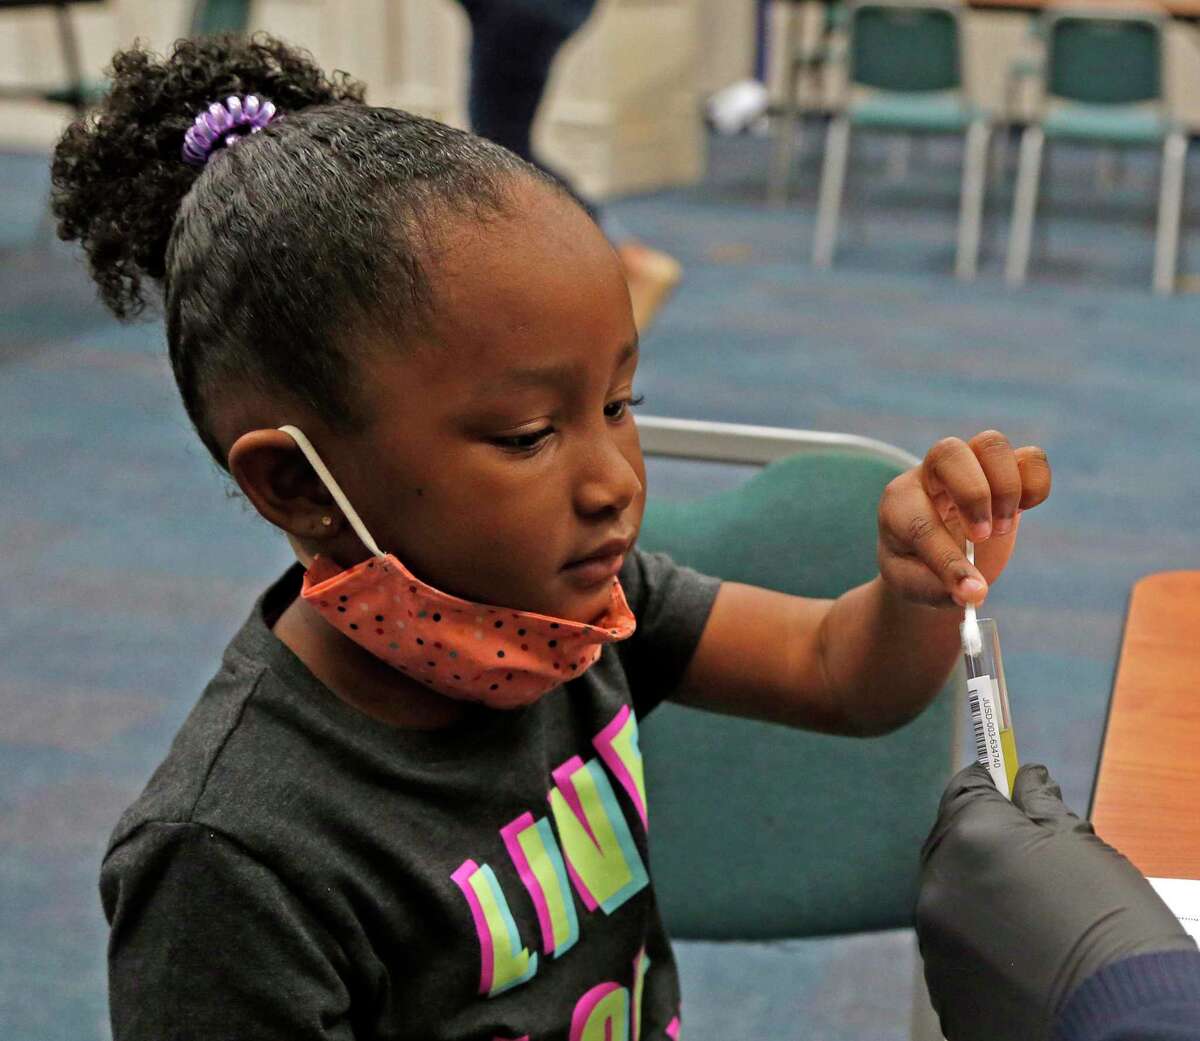 Harleigh Holloway, 4, submits her COVID-19 screening after swabbing her nose. She took part in the nonprofit Community Labs’ weekend COVID-19 testing on March 14 as some local schools prepared to reopen their classrooms after spring break.